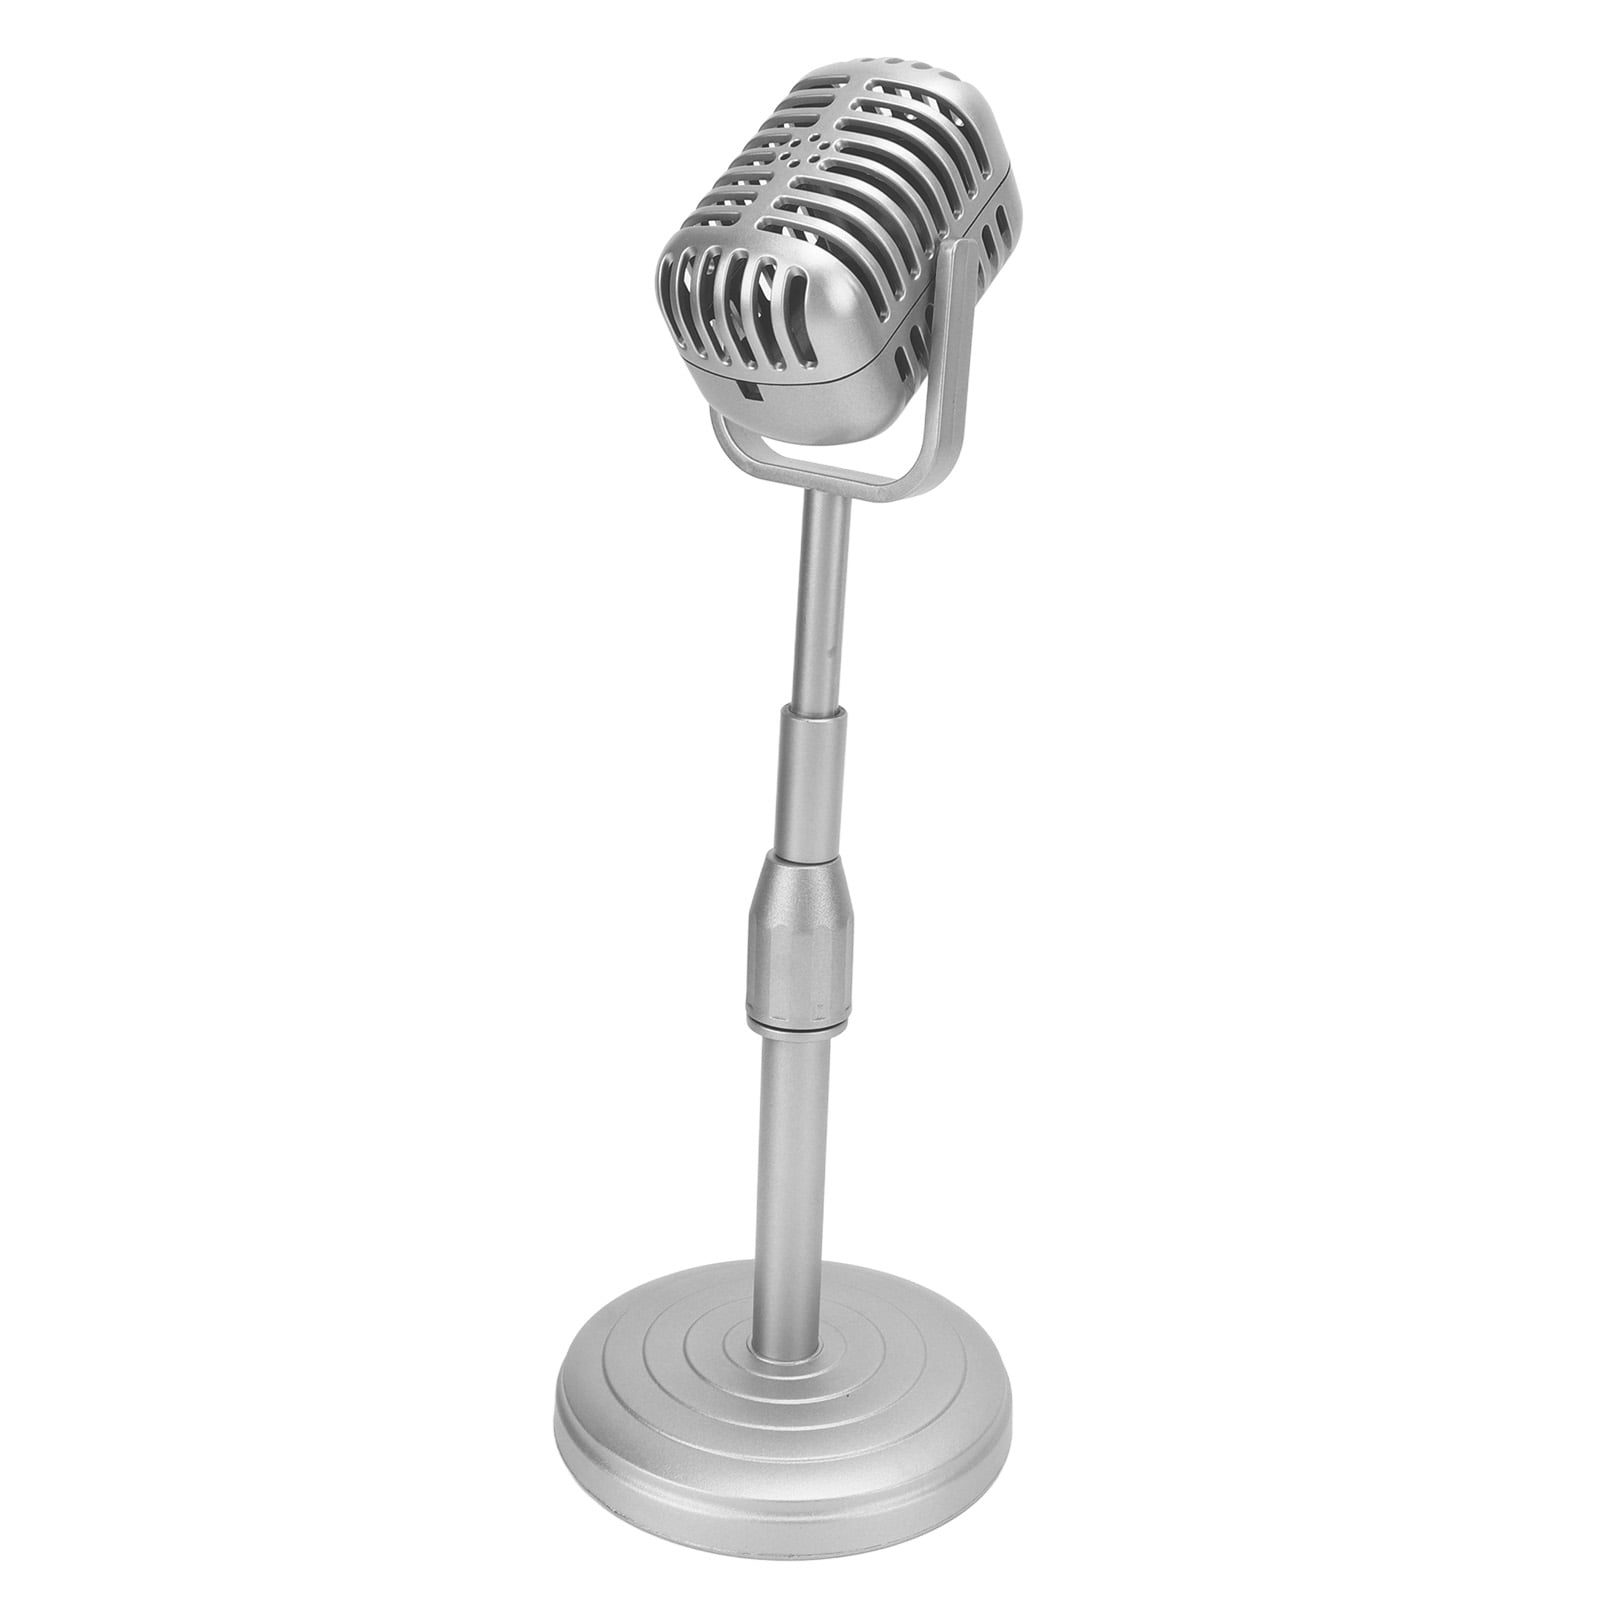 Plastic Fake Microphone for Karaoke Fun Stage Birthday Party Vbestlife Prop Microphone Simulation Prop Microphone 